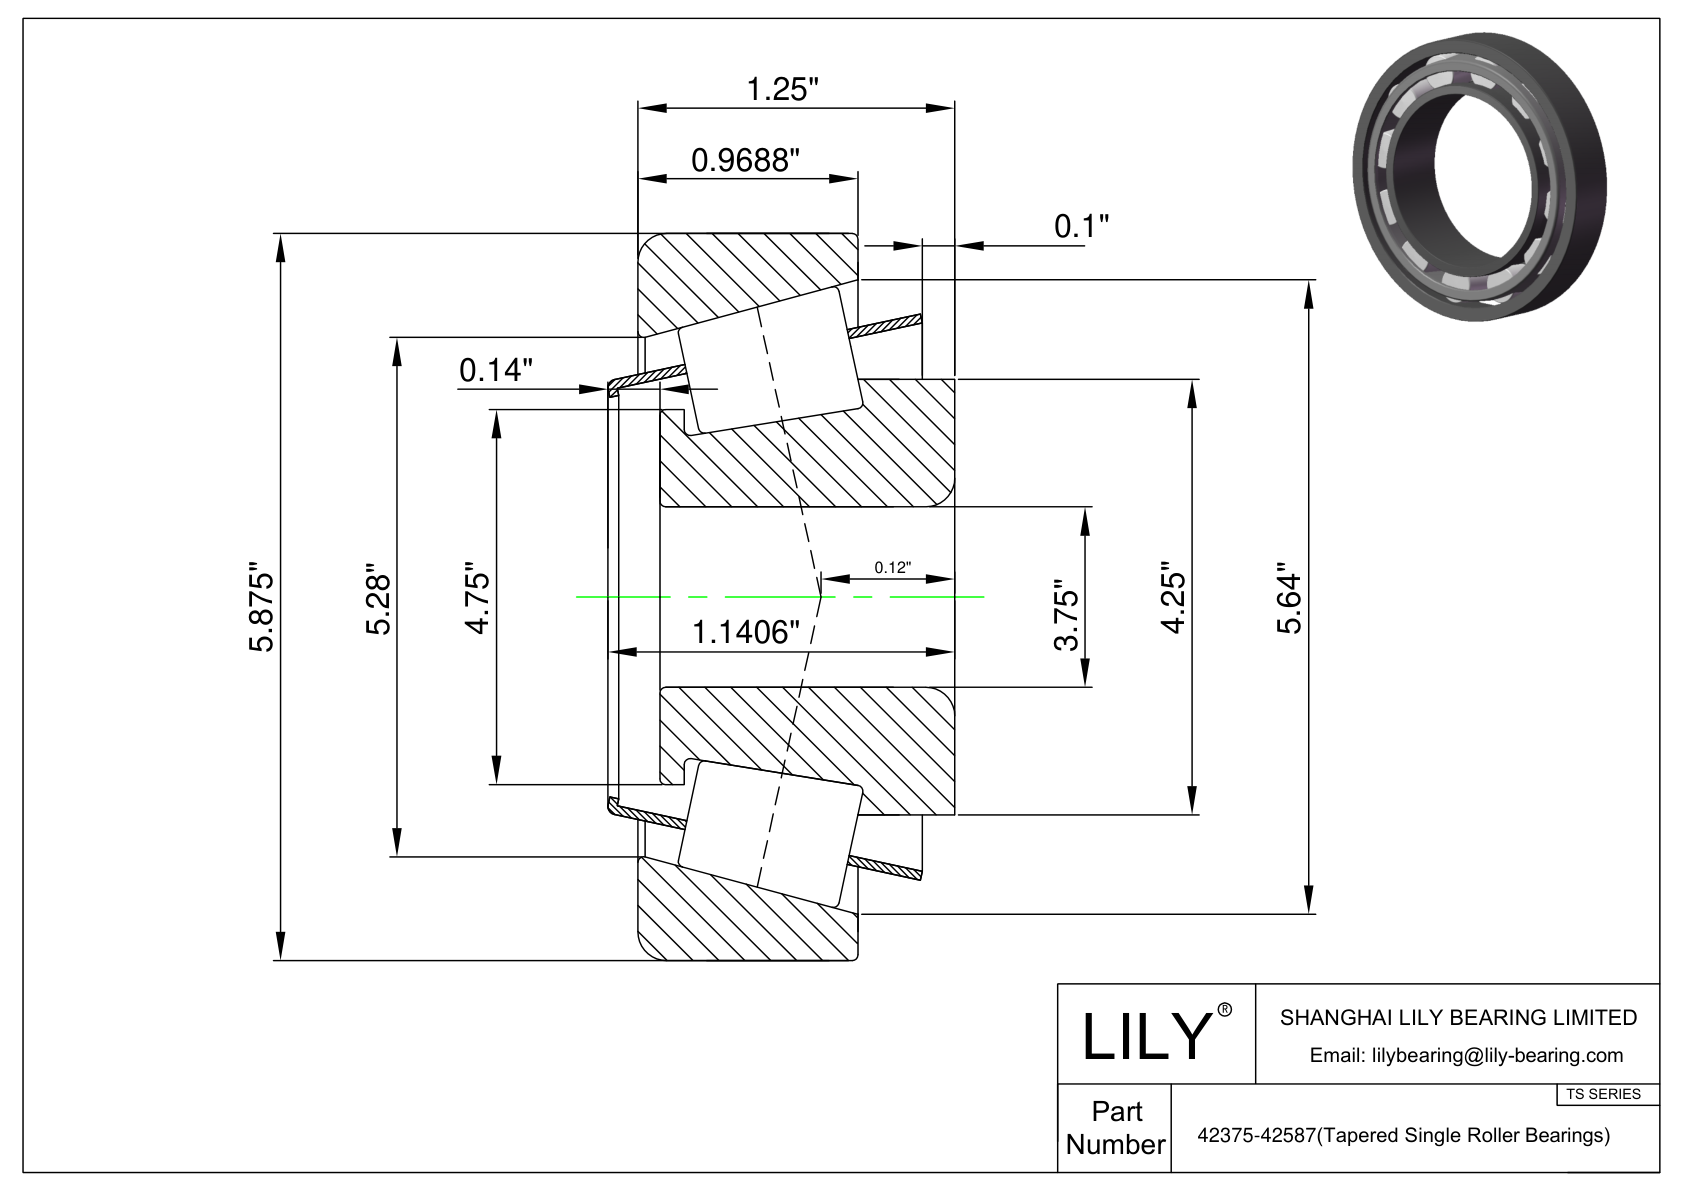 42375-42587 TS (Tapered Single Roller Bearings) (Imperial) cad drawing